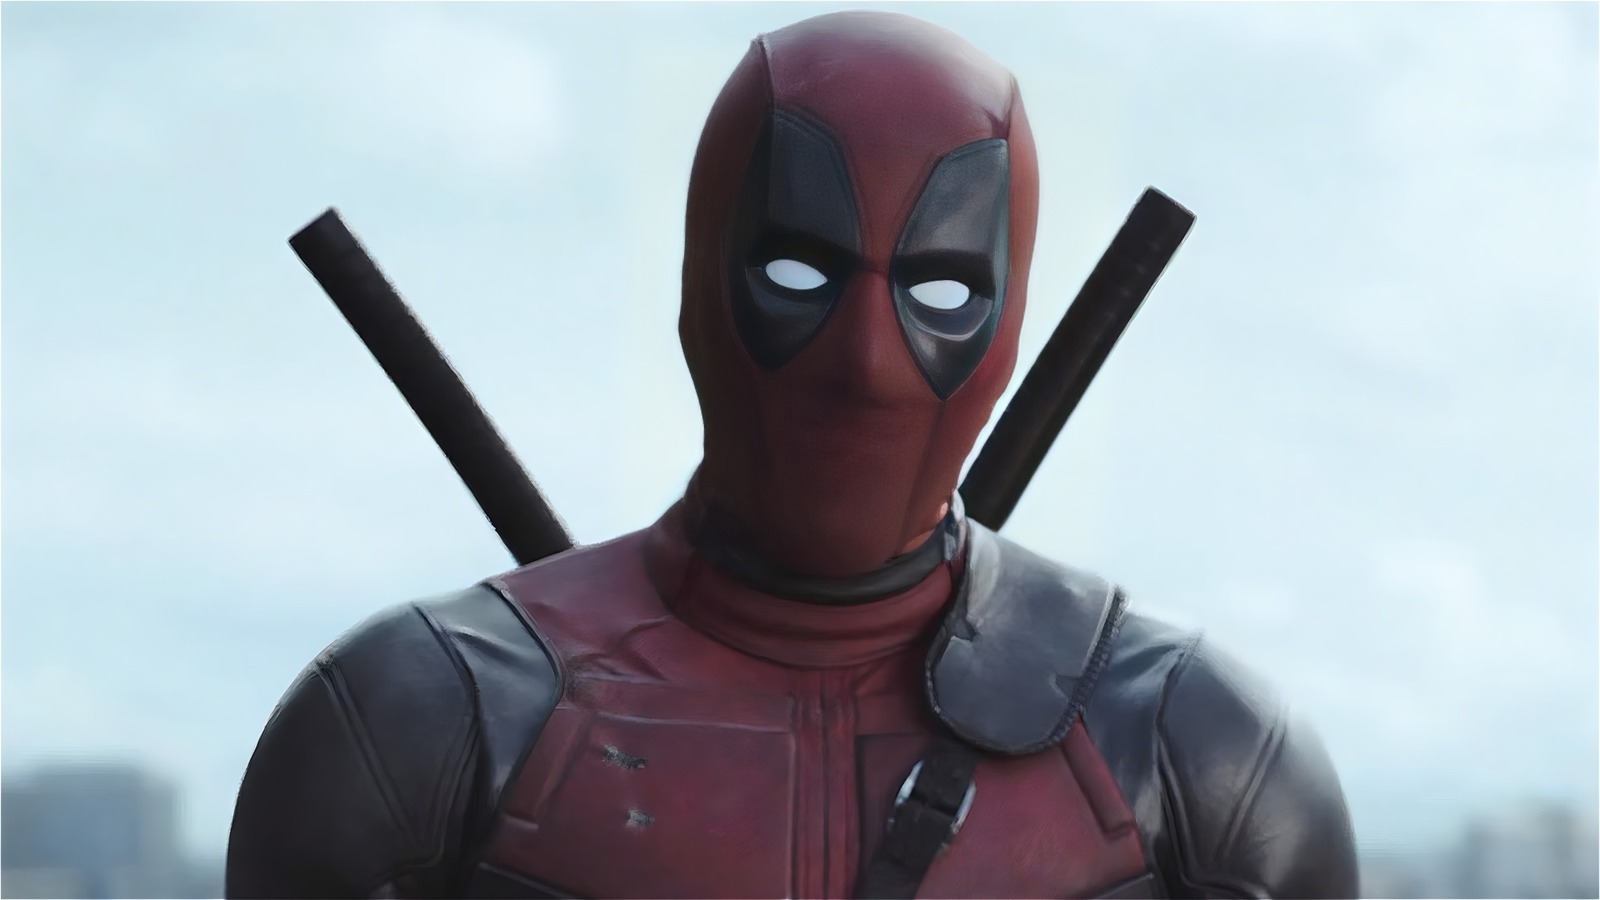 Canceled X-Men Character Will Make Debut in 'Deadpool 3' - Inside the Magic